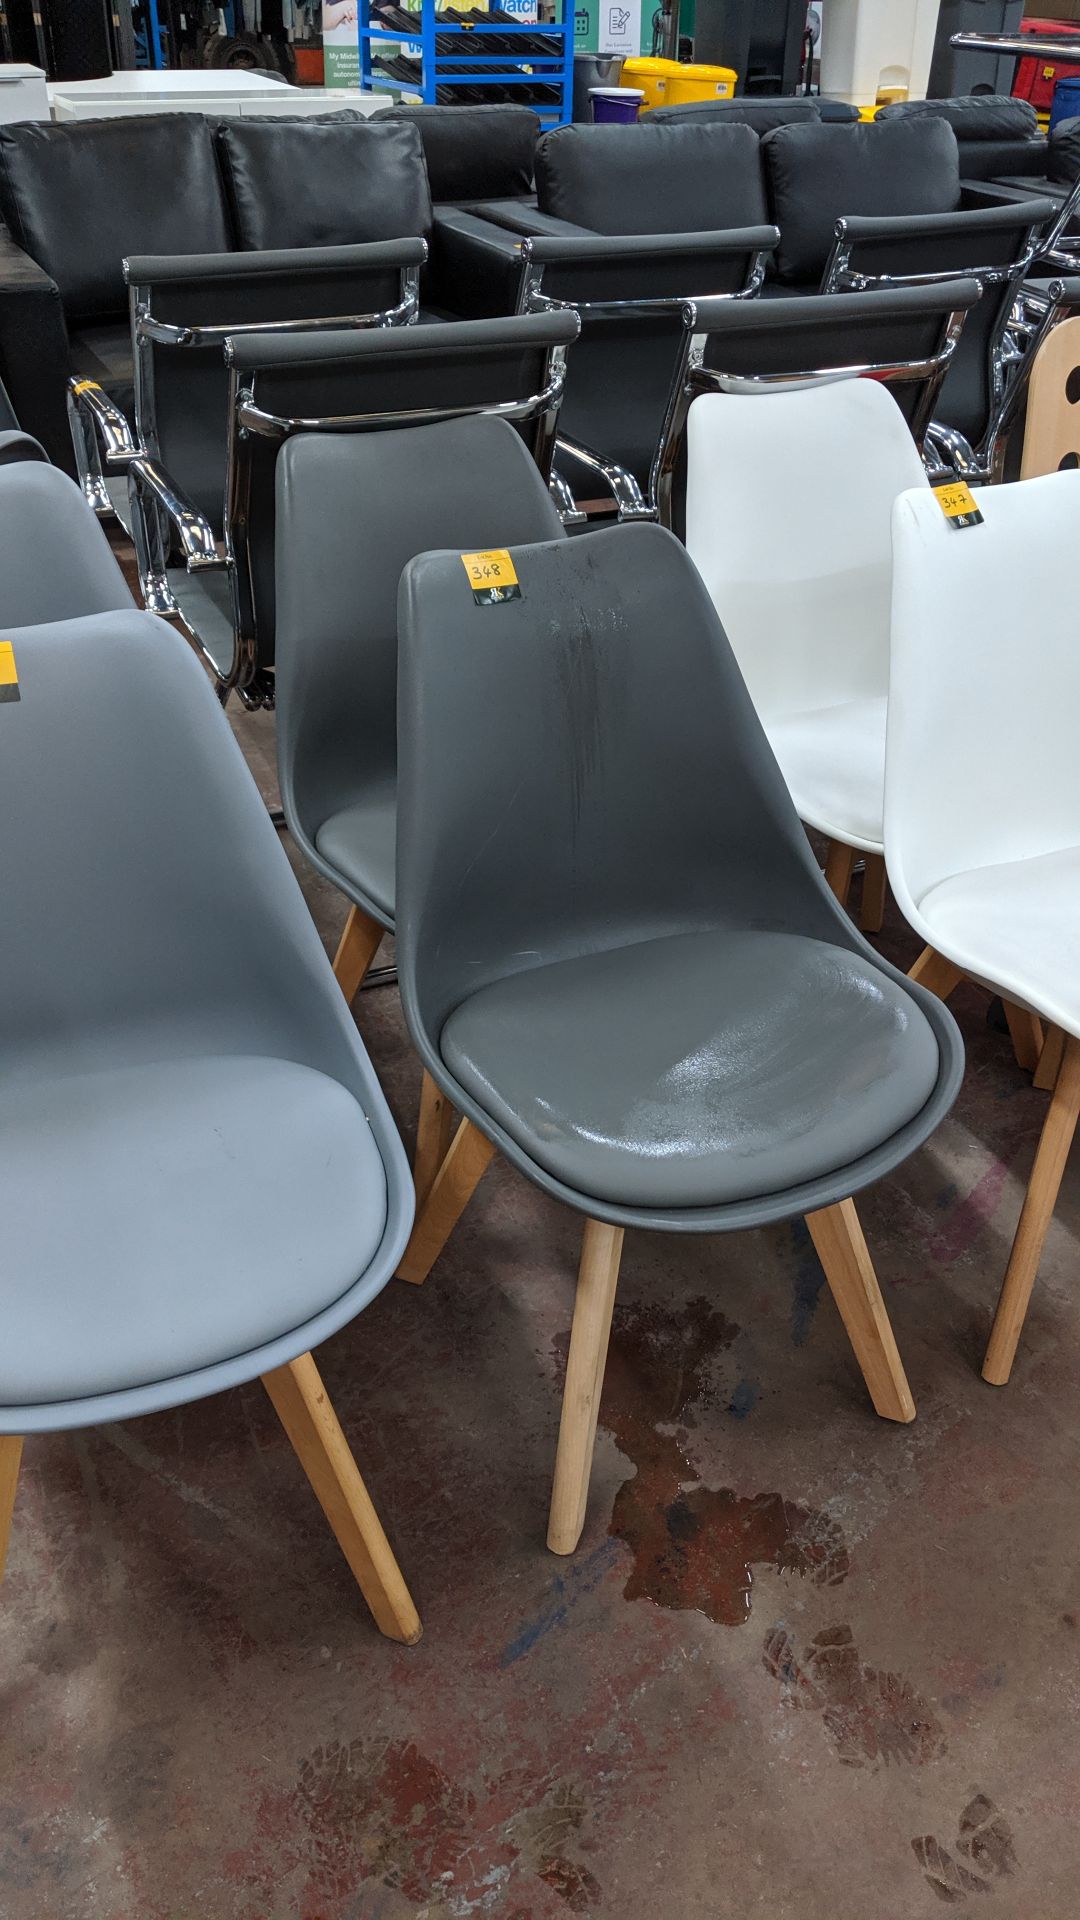 Pair of grey chairs on wooden legs with upholstered seat bases NB. Lots 347 - 349 consist of the